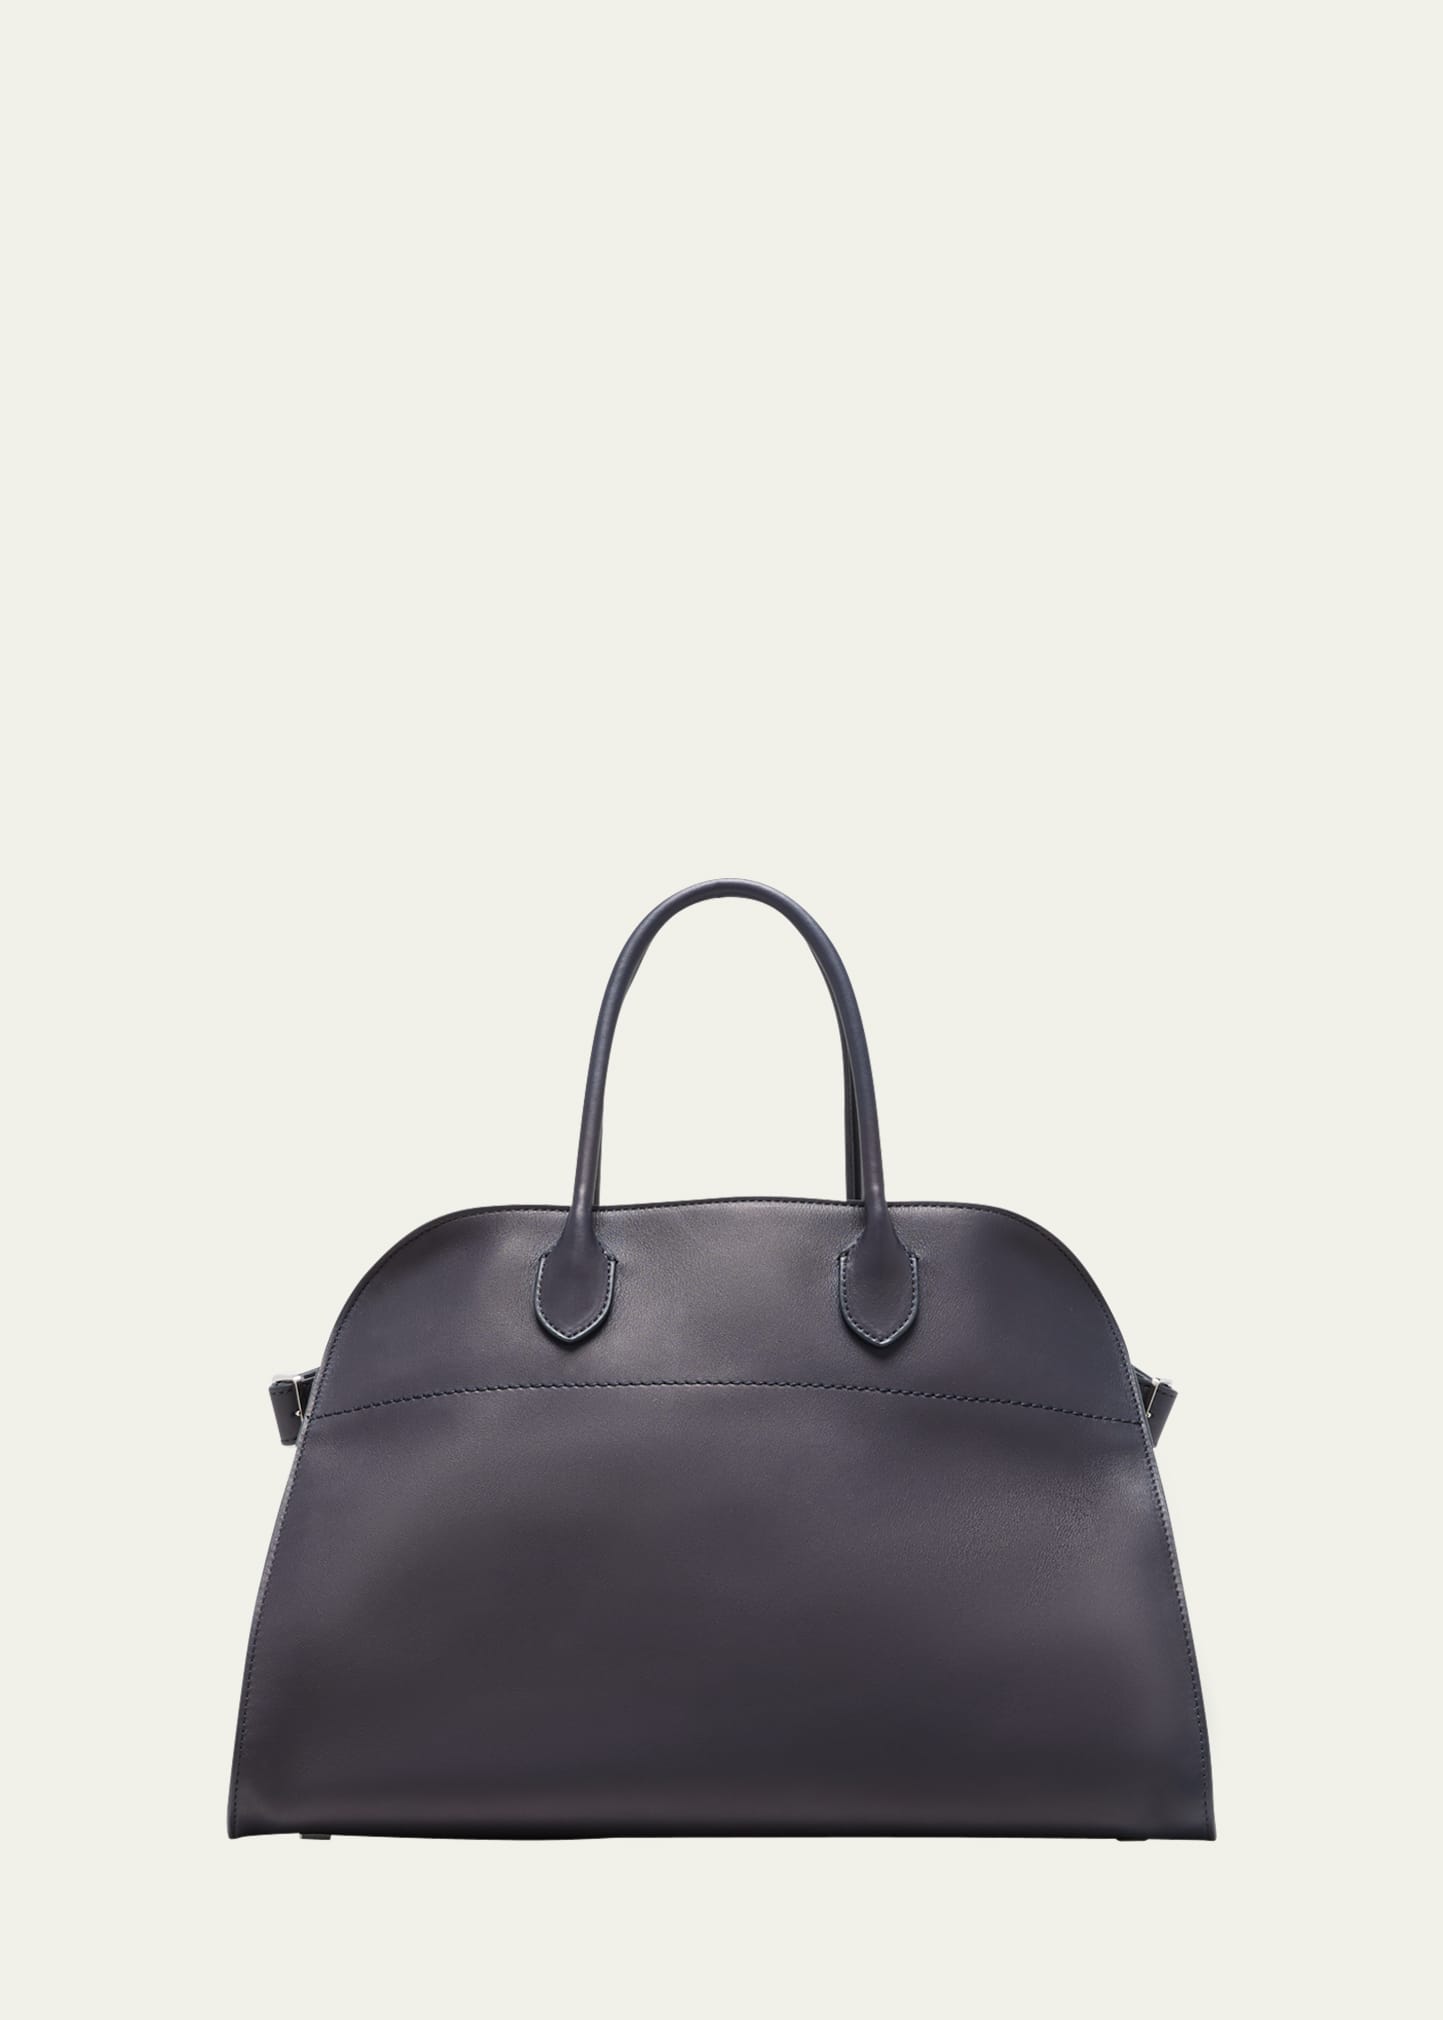 The Row Margaux 15 Air Bag In Calfskin Leather In Mrpd8 Marine Pld